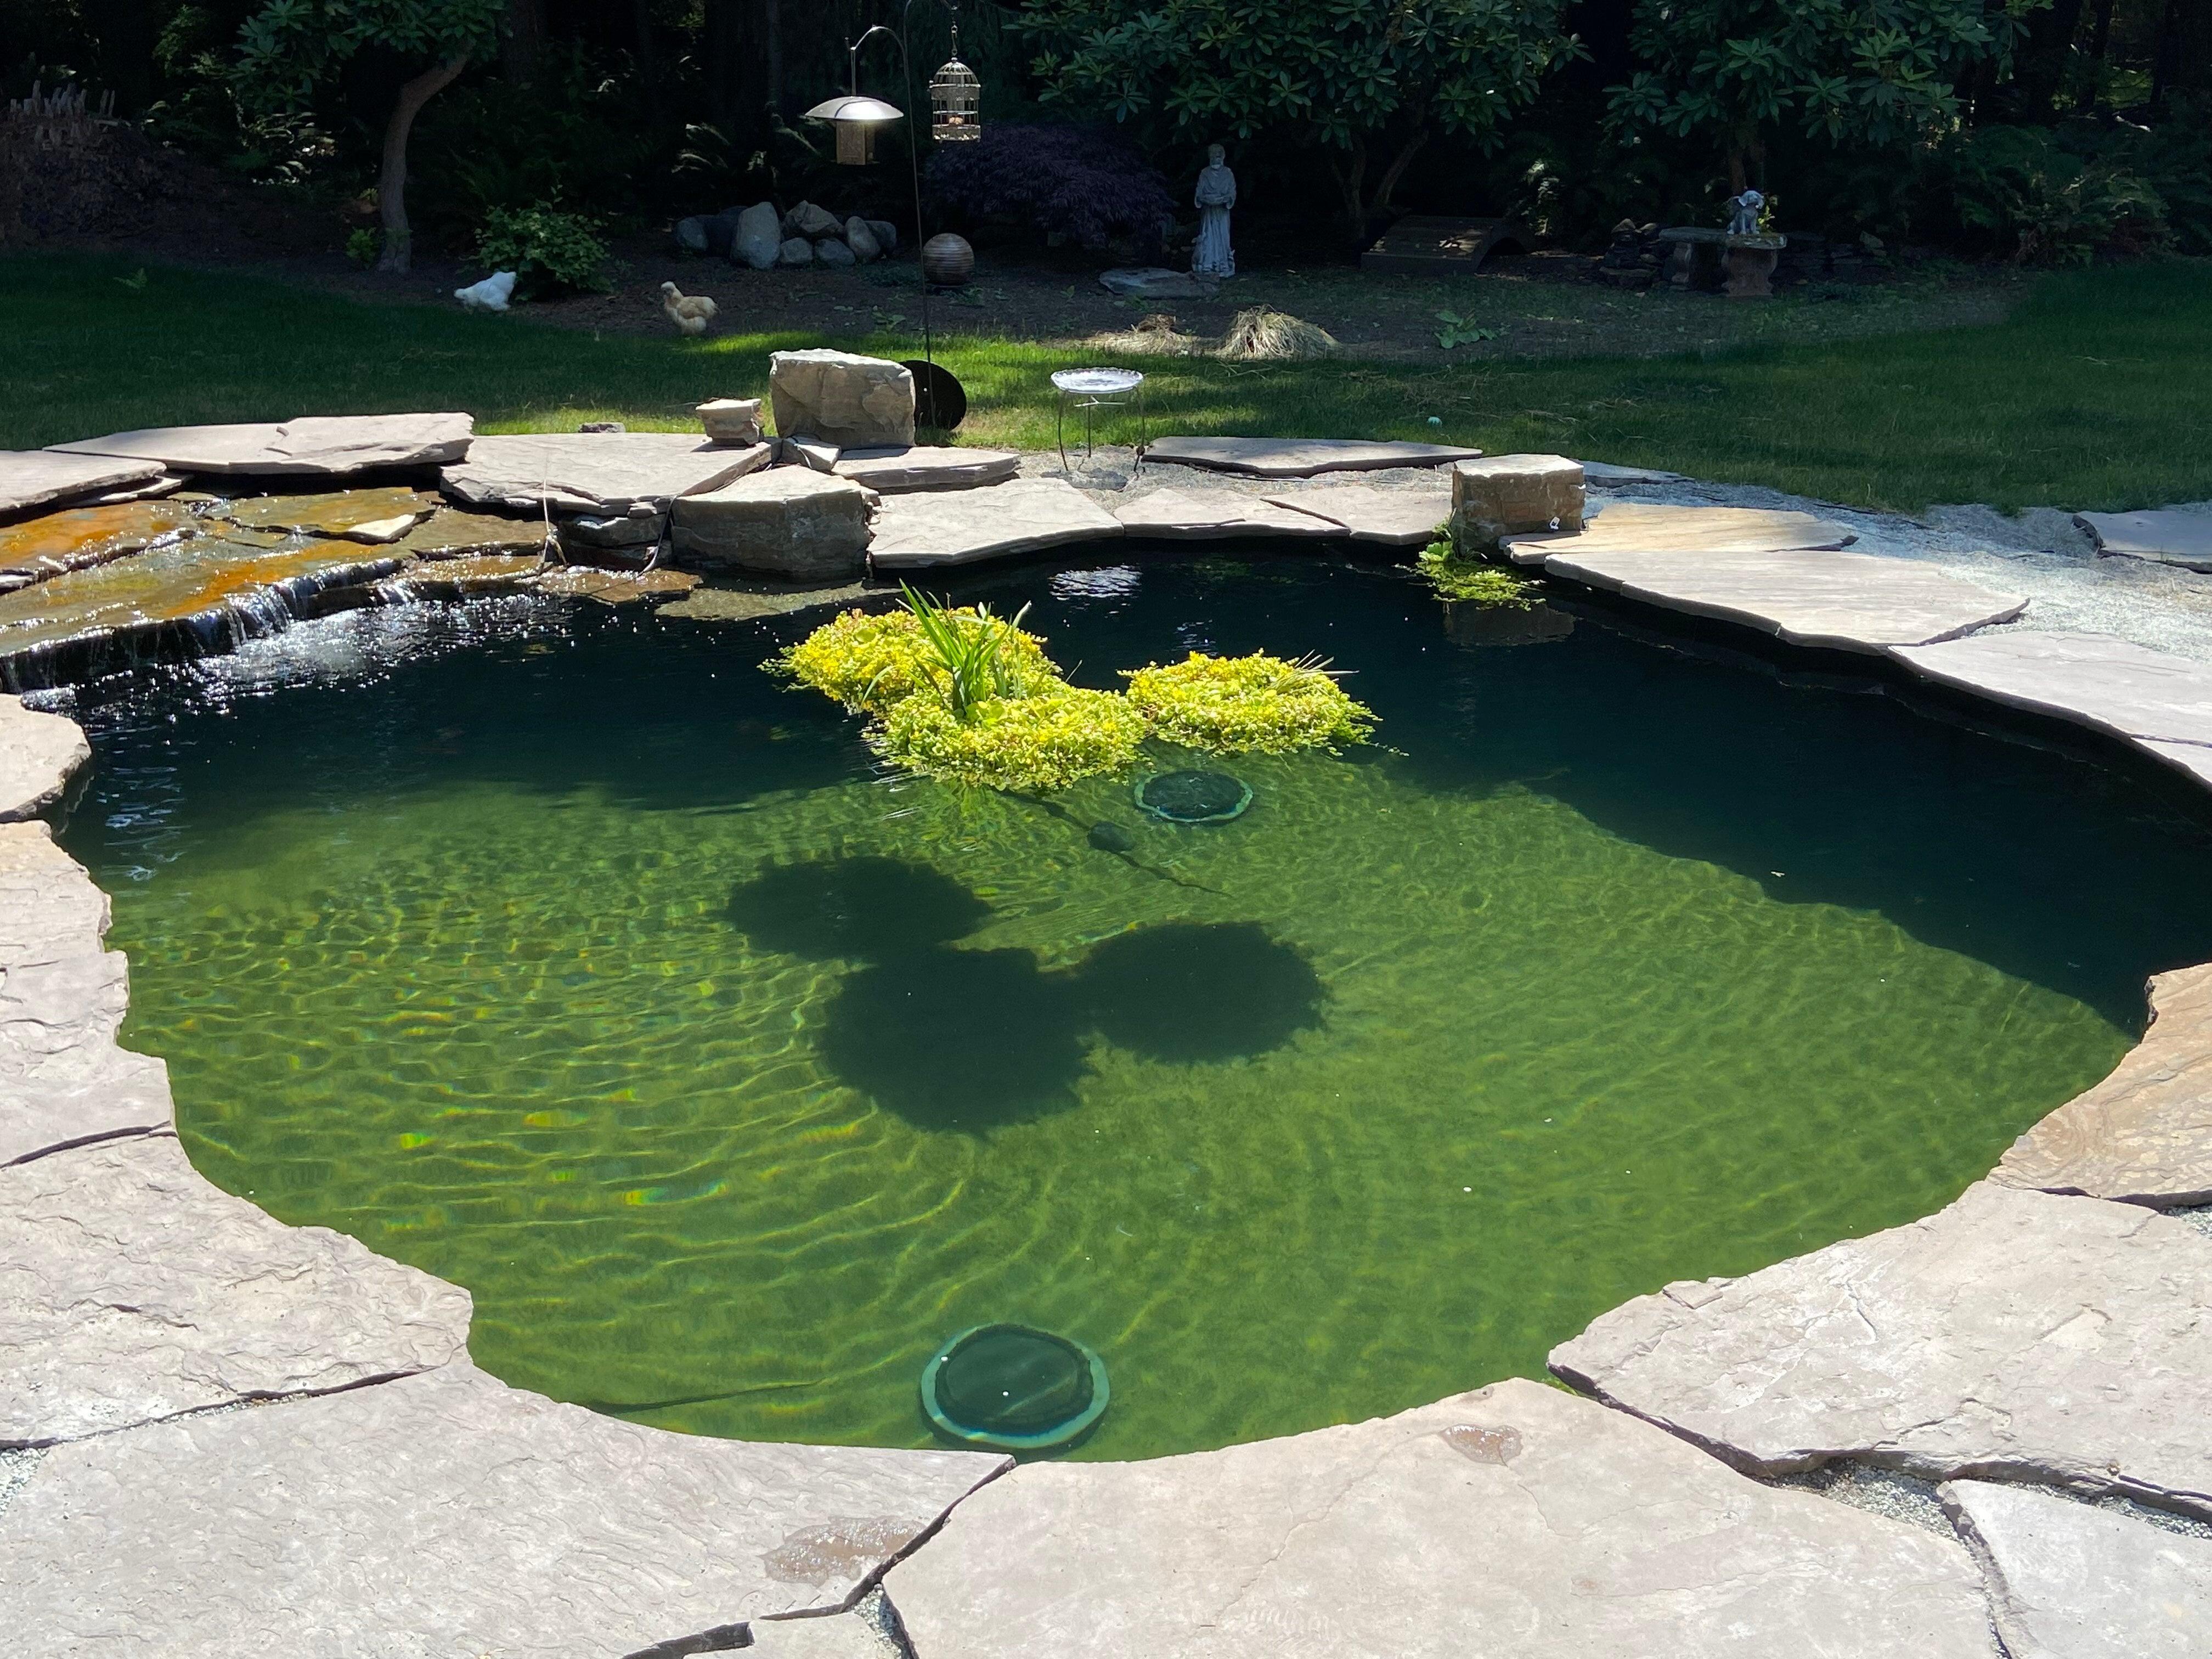 COVID Koi Pond Project - Rick and Sherry Koske Redefine Vacationing - Play It Koi